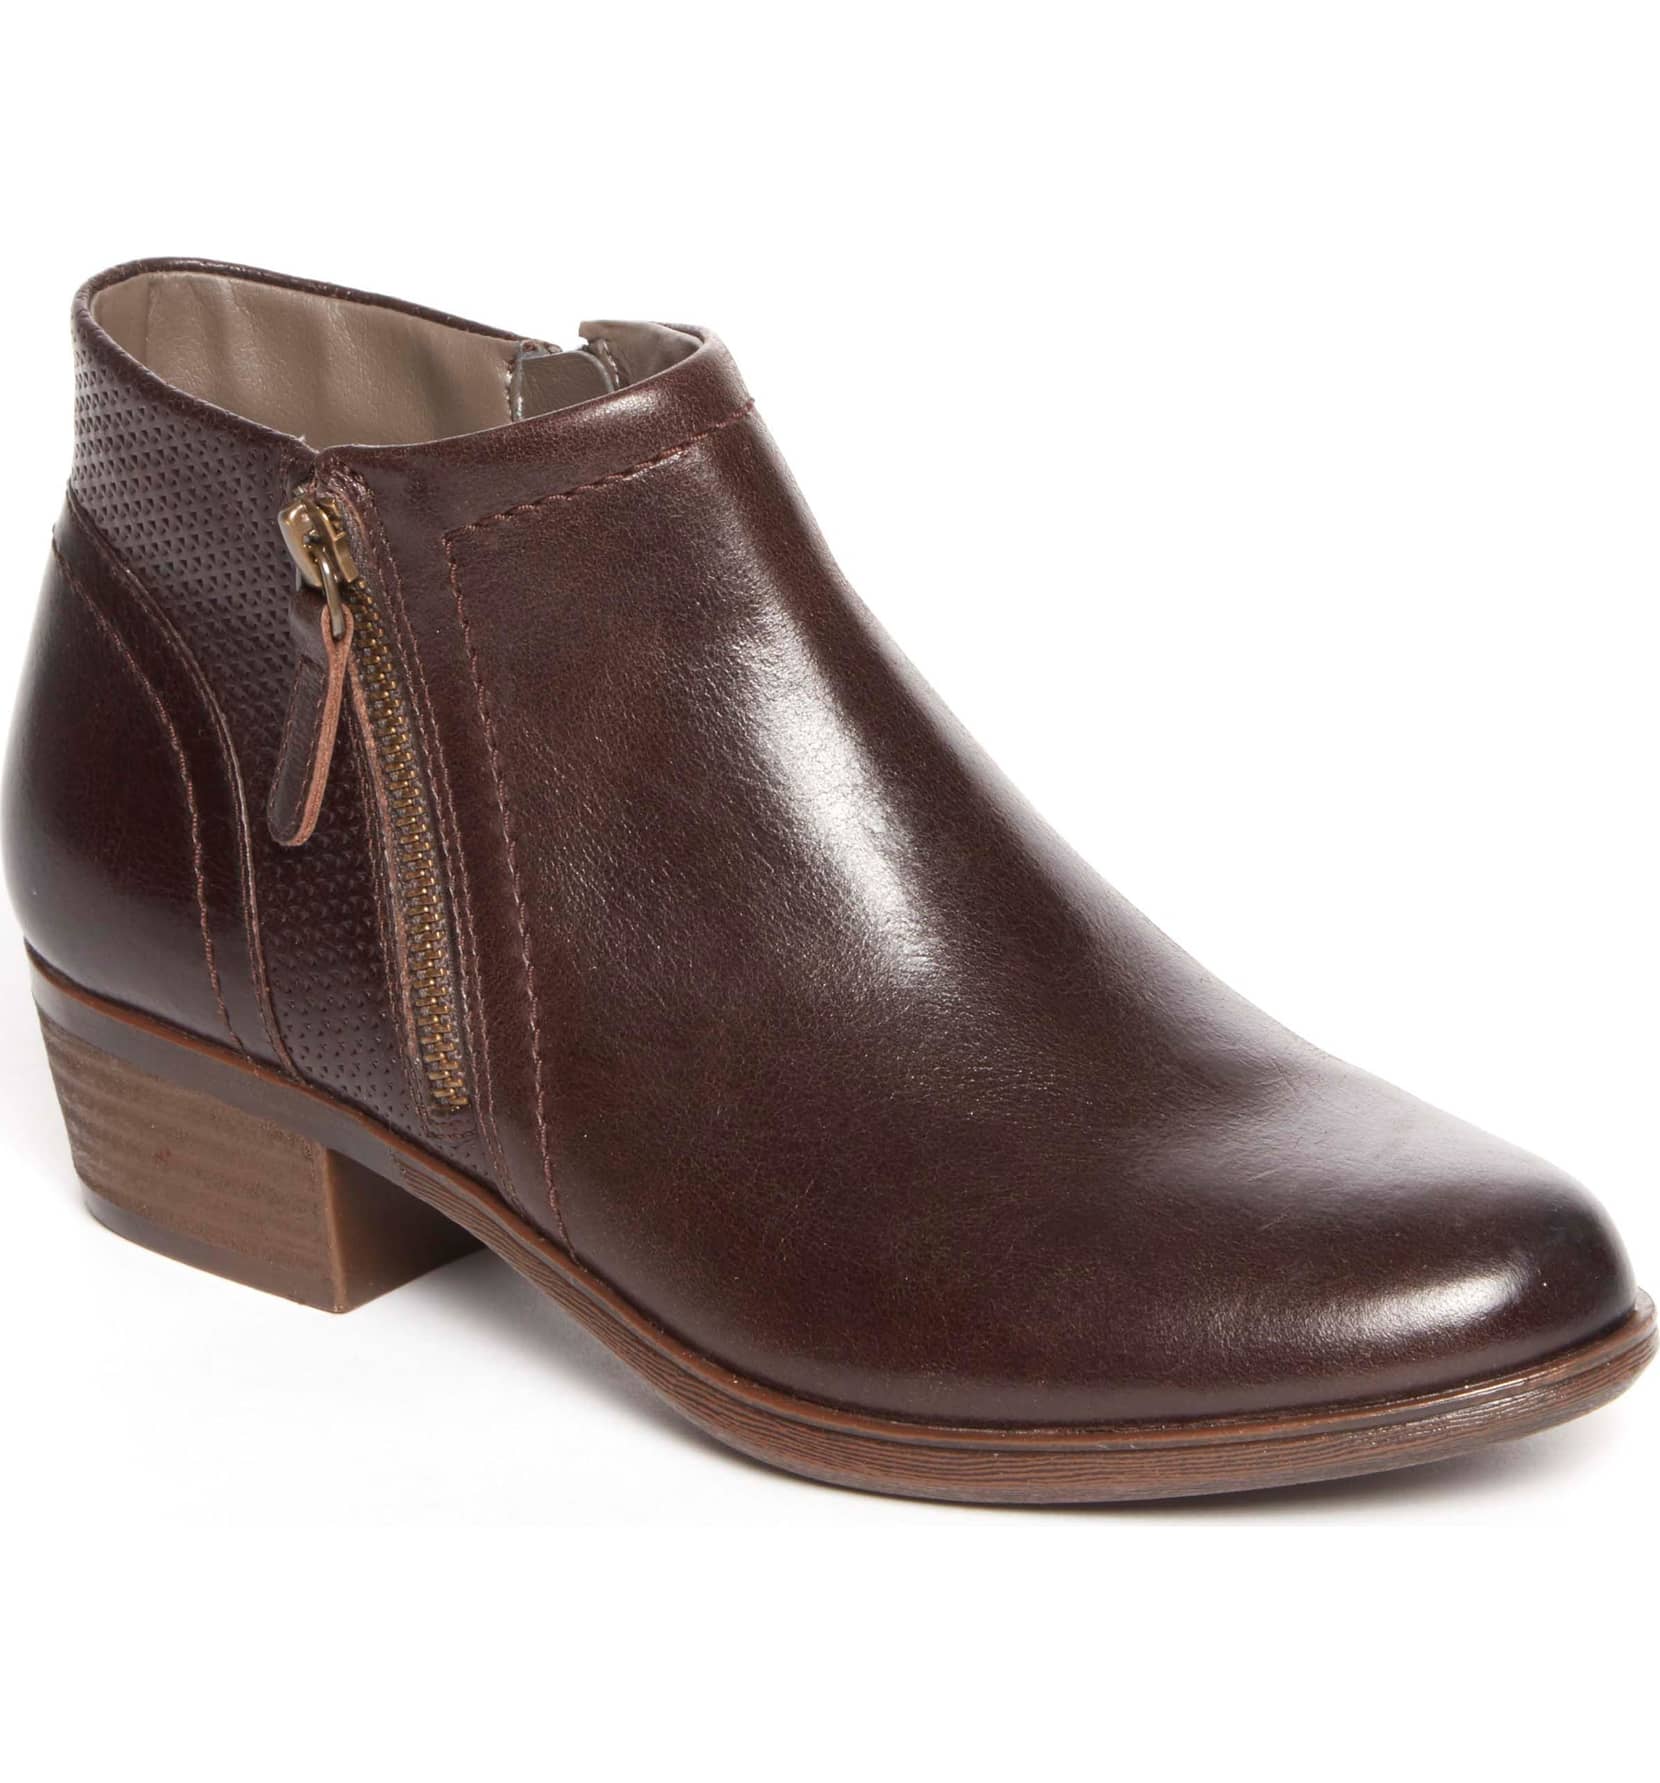 rockport ankle boot